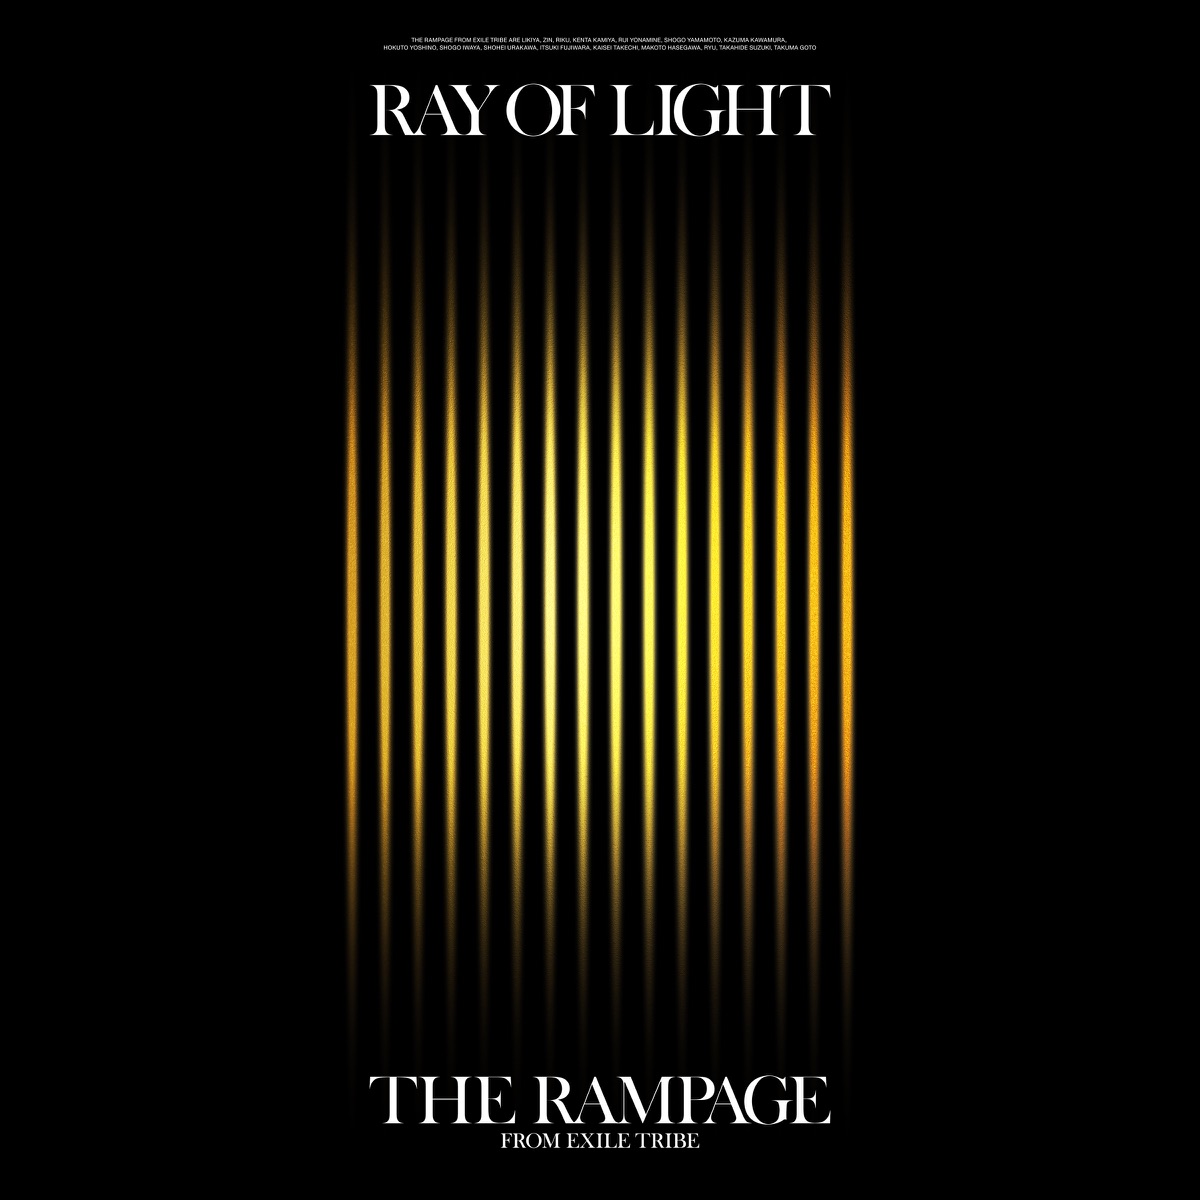 16SOUL - Album by THE RAMPAGE from EXILE TRIBE - Apple Music